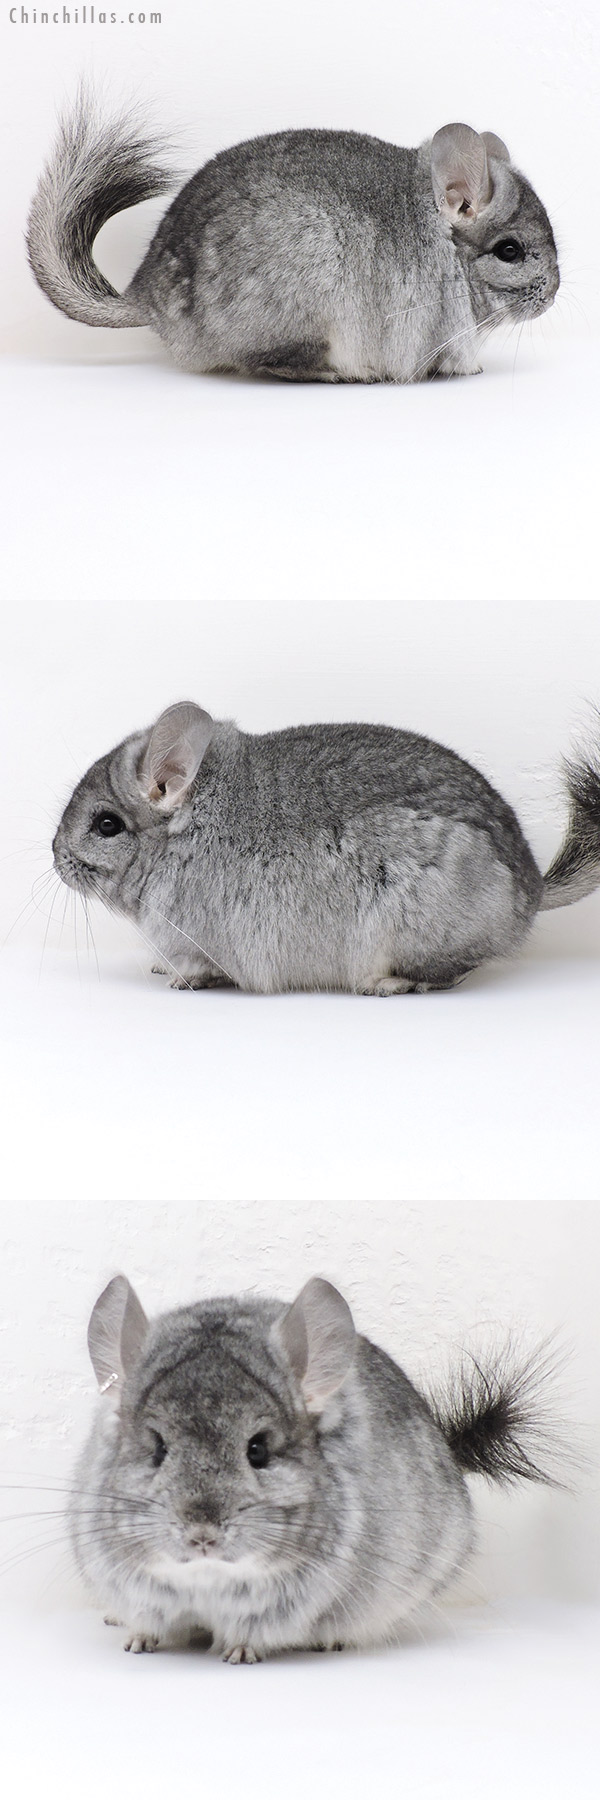 Chinchilla or related item offered for sale or export on Chinchillas.com - 17029 Standard  Royal Persian Angora Male Chinchilla